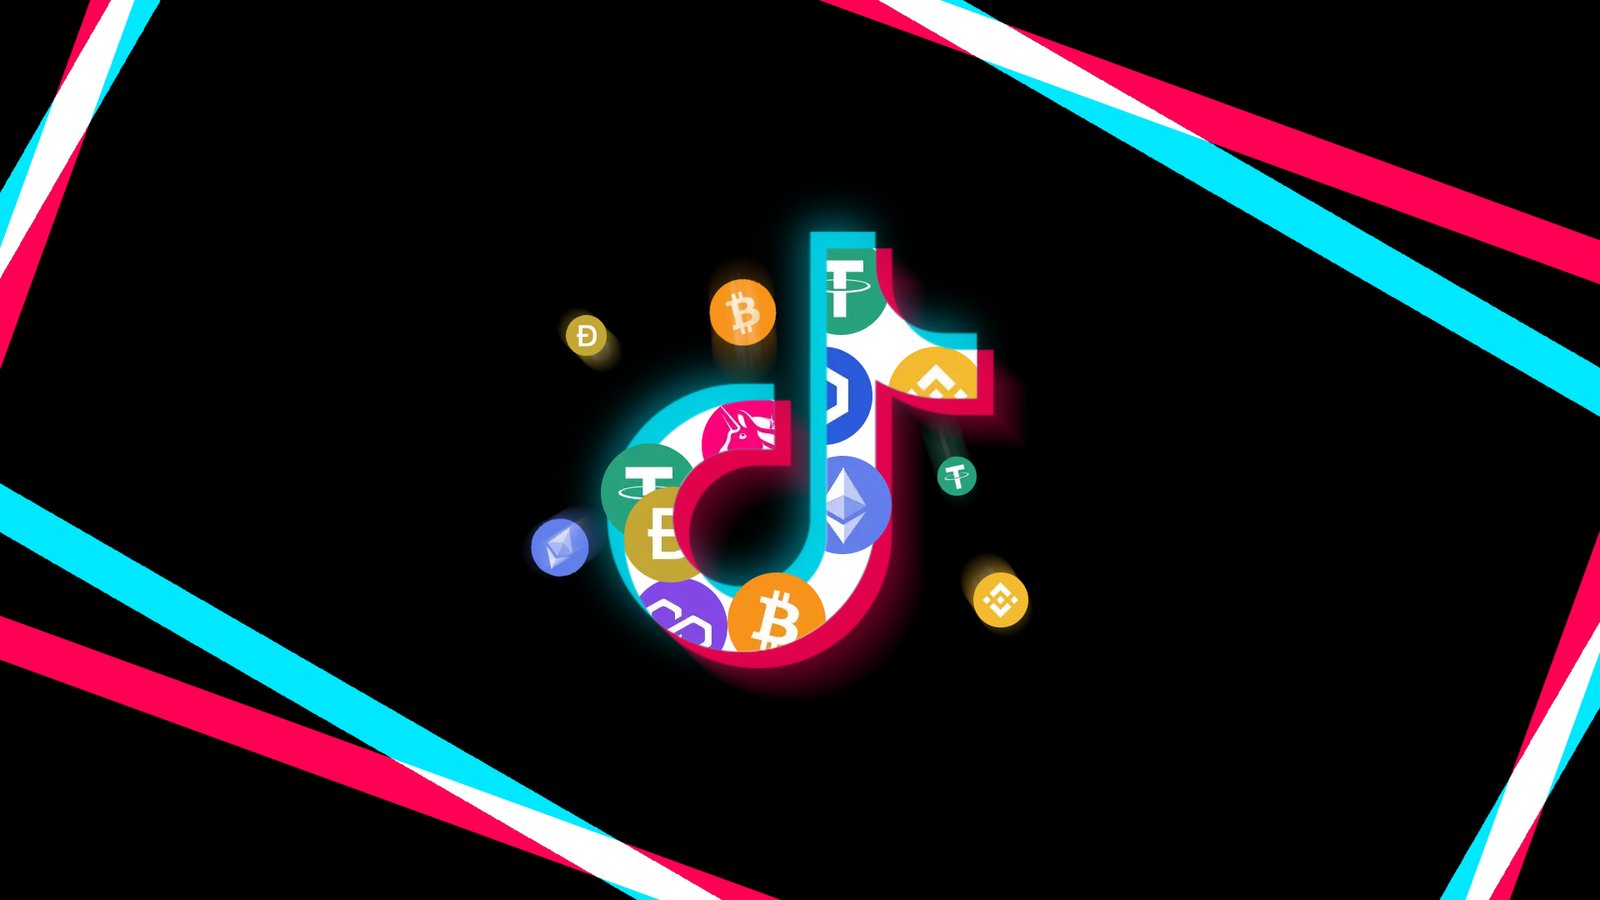 10 Best Crypto Accounts To Follow on TikTok in 2023 for Your Daily Dose of Information 4